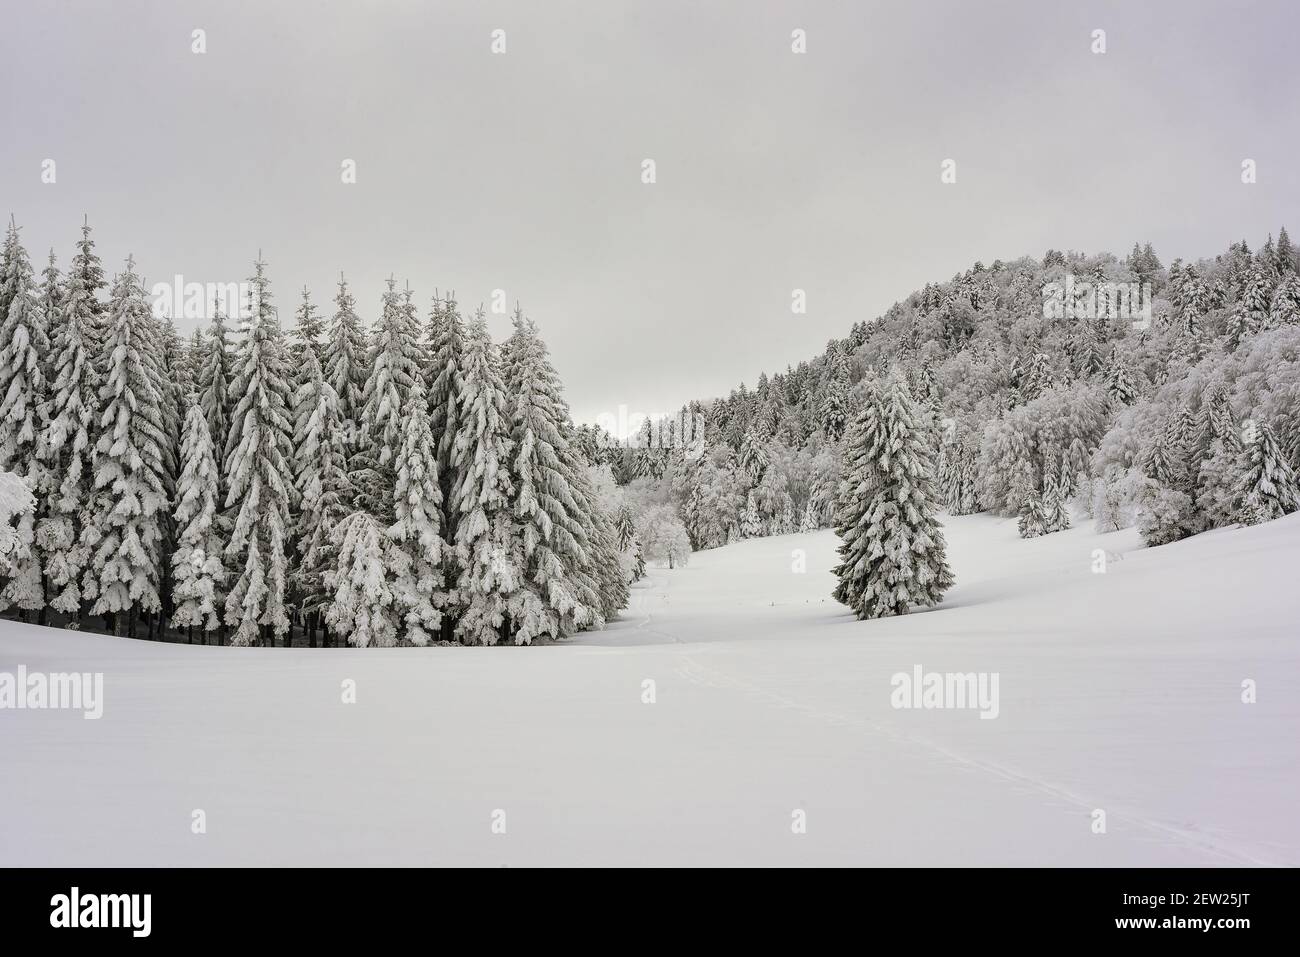 France, Ain, Jura Massif, Chautagne, Valromey, spice forest covered with fresh snow in a valley near the Biche pass Stock Photo